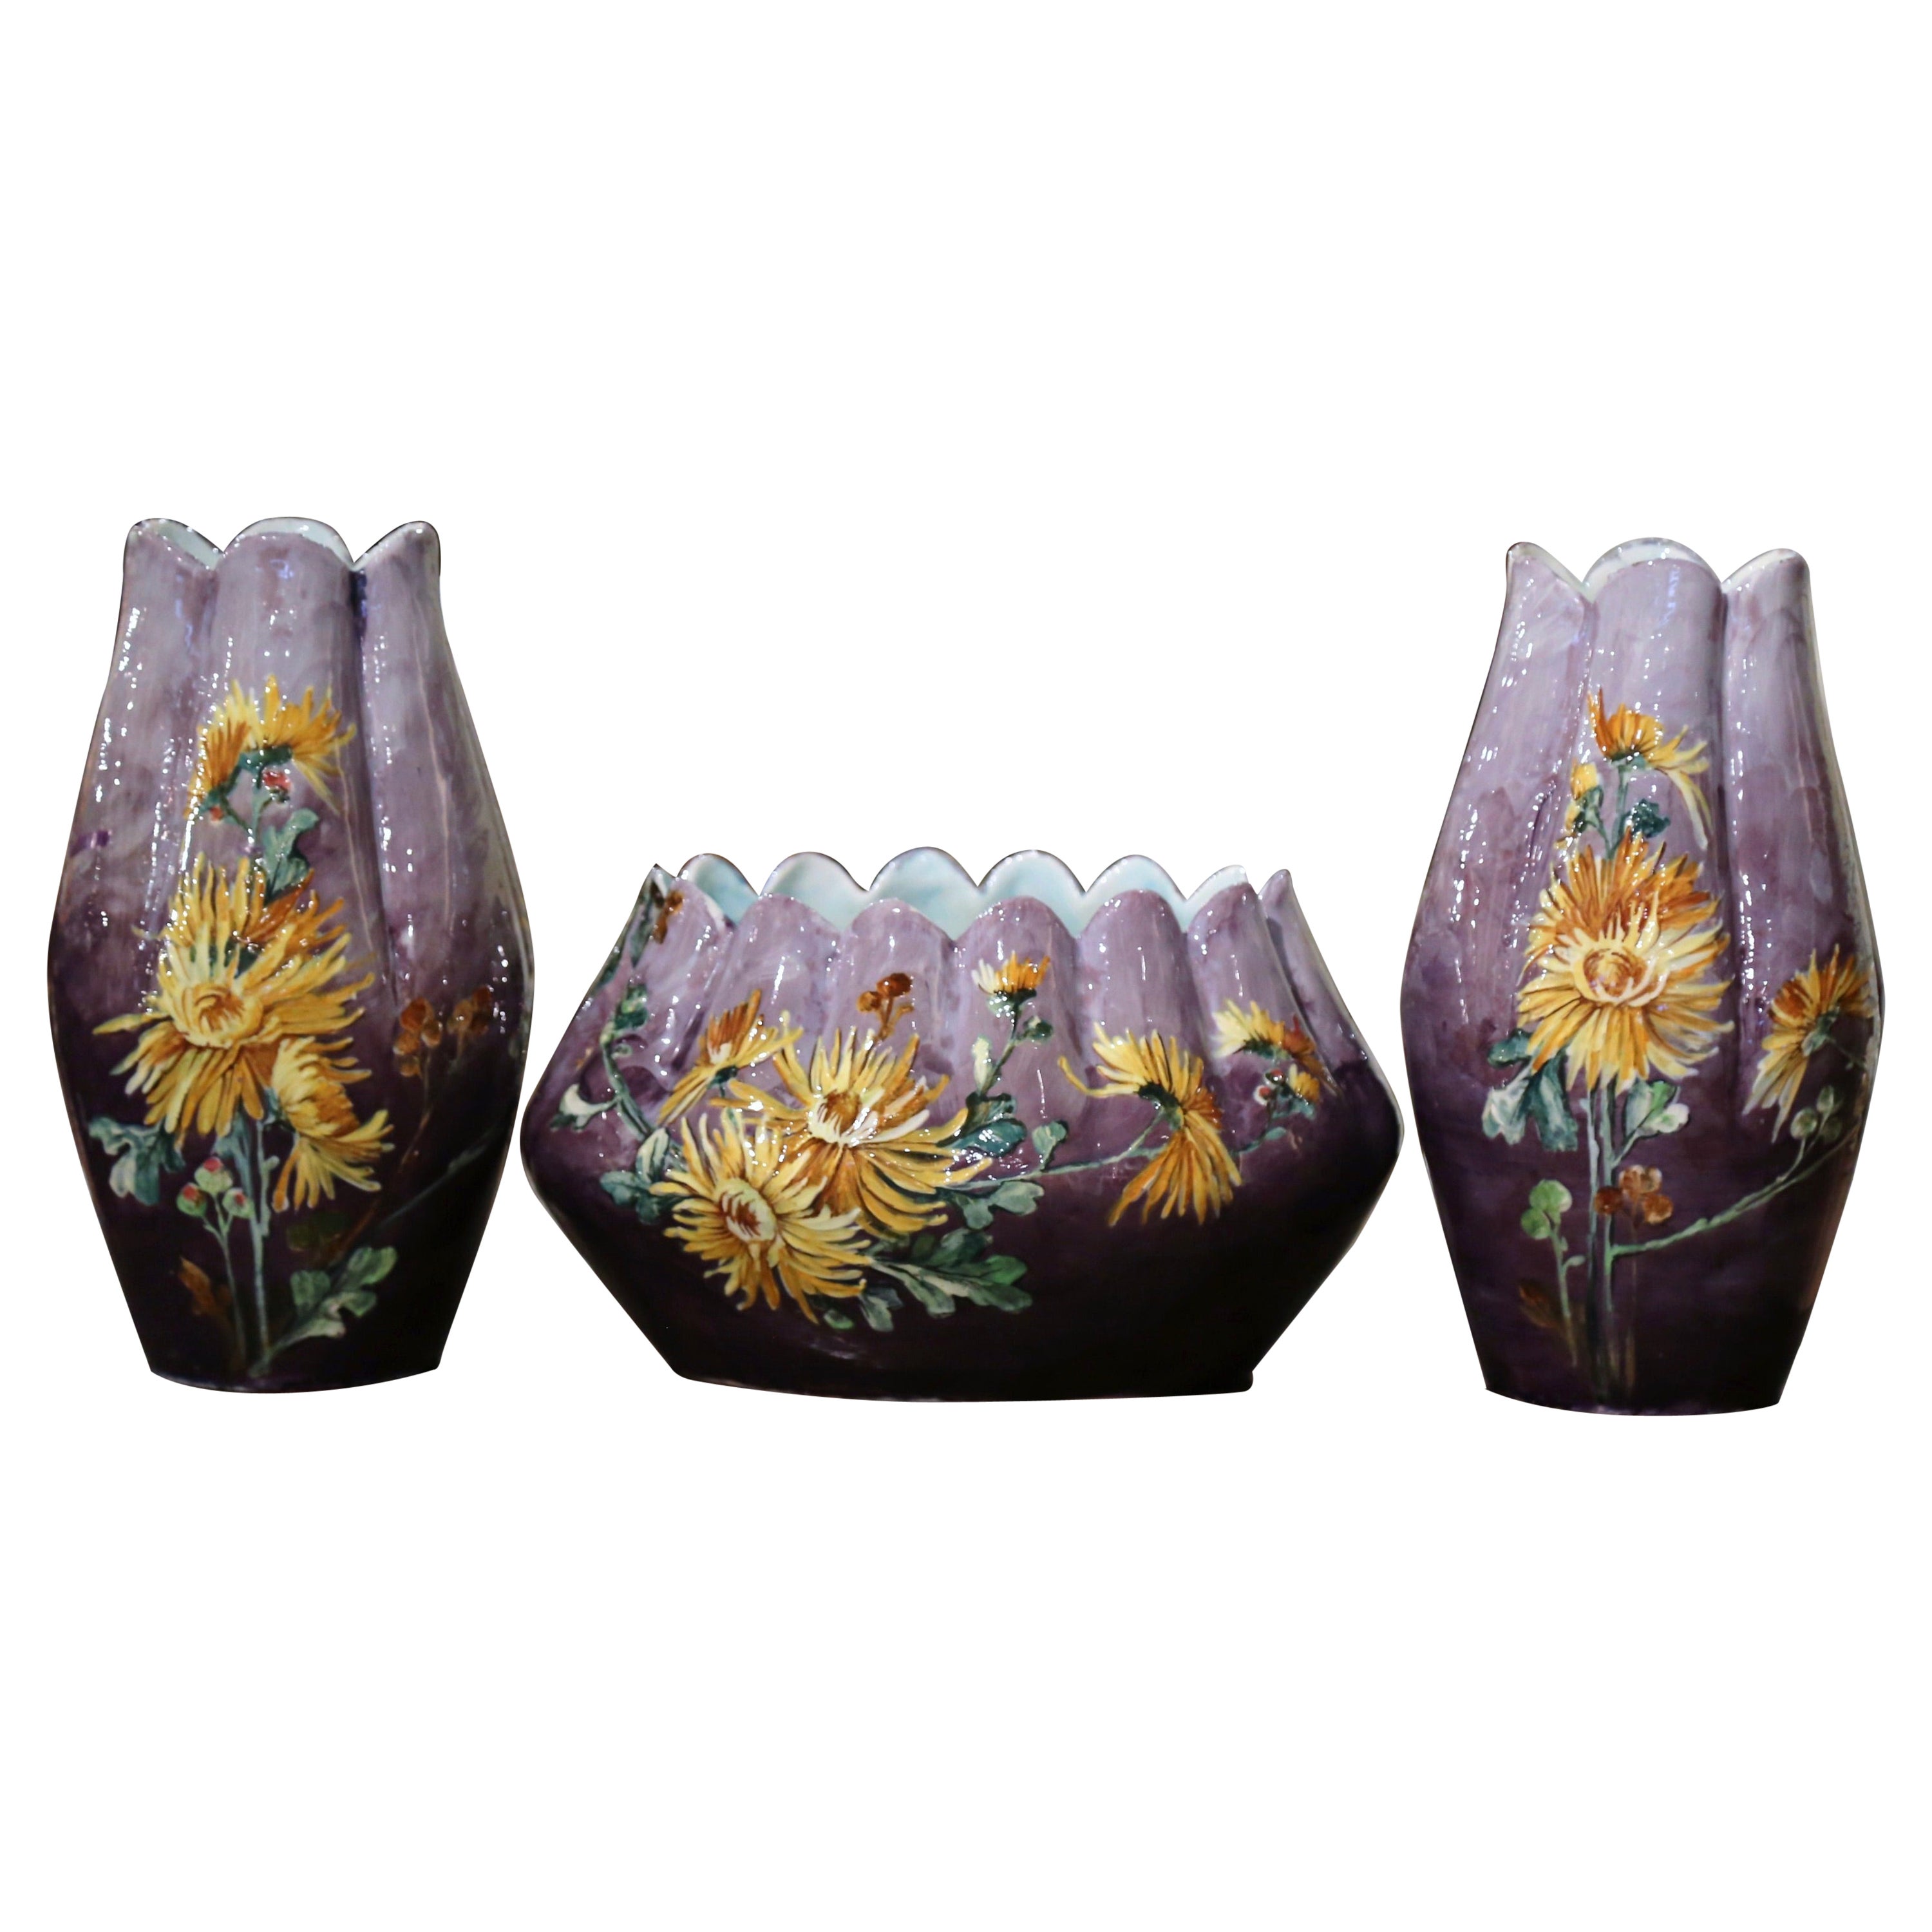 19th Century French Hand-Painted Barbotine Vases Signed P. Perret, Set of Three For Sale